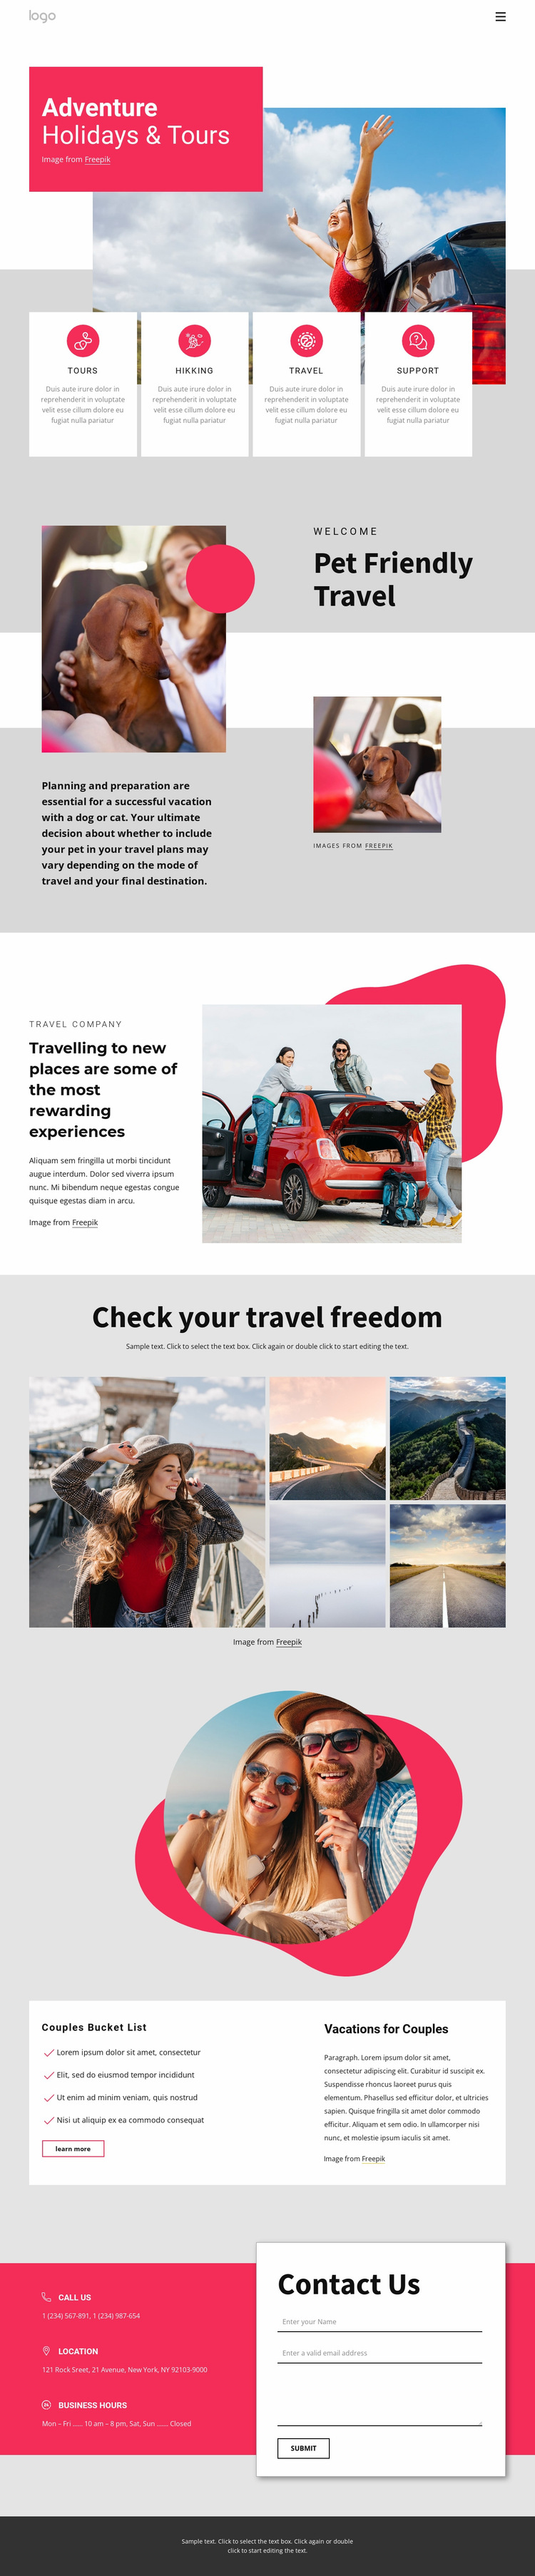 Adventure holidays and tours Website Builder Templates